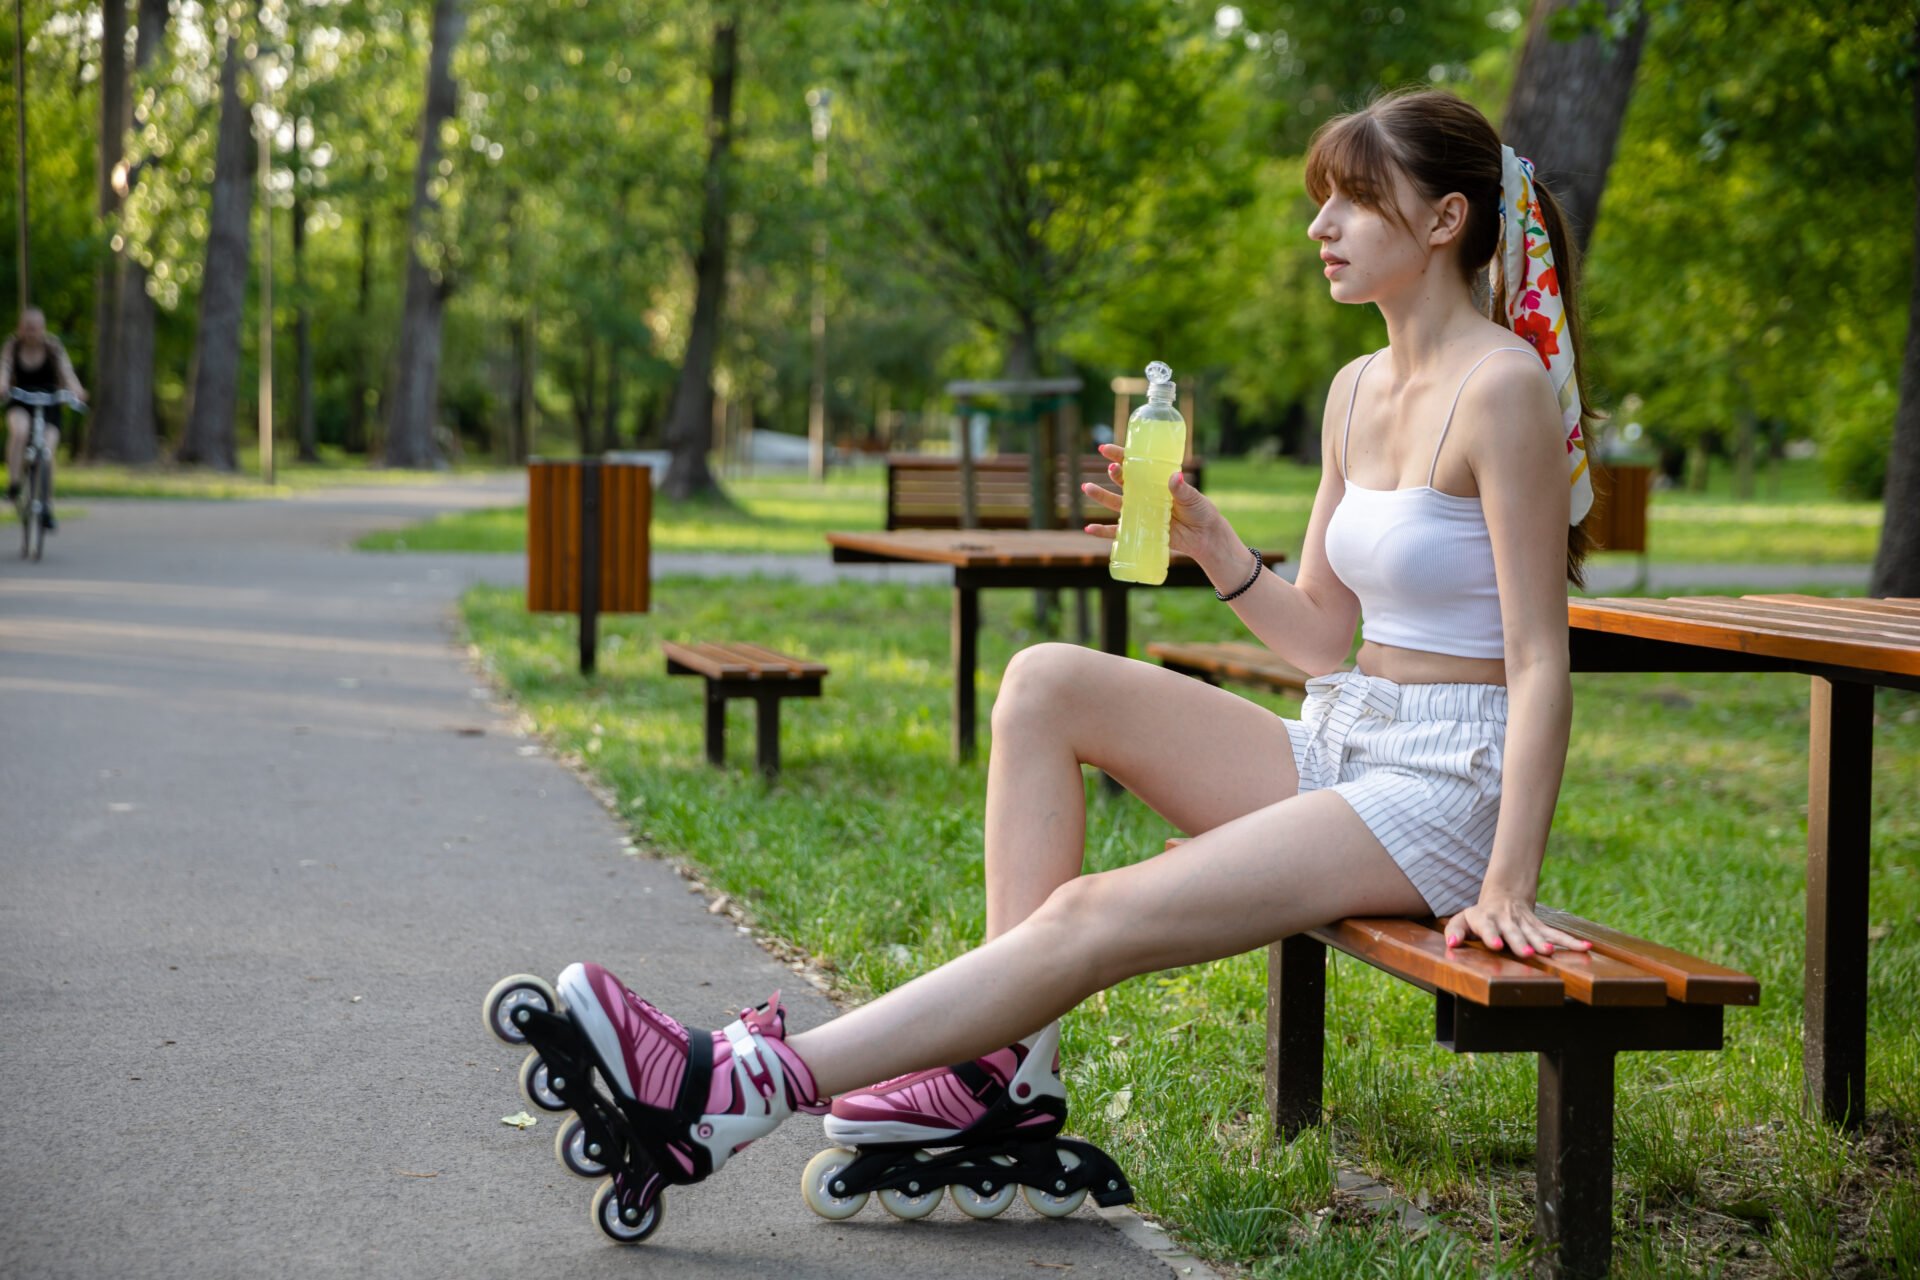 A young girl in shorts and a sports top sits on a bench. She is holding a bottle with a yellow isotonic drink. A figure riding a bicycle is visible in the background. Trees and lawns in the blurred background.